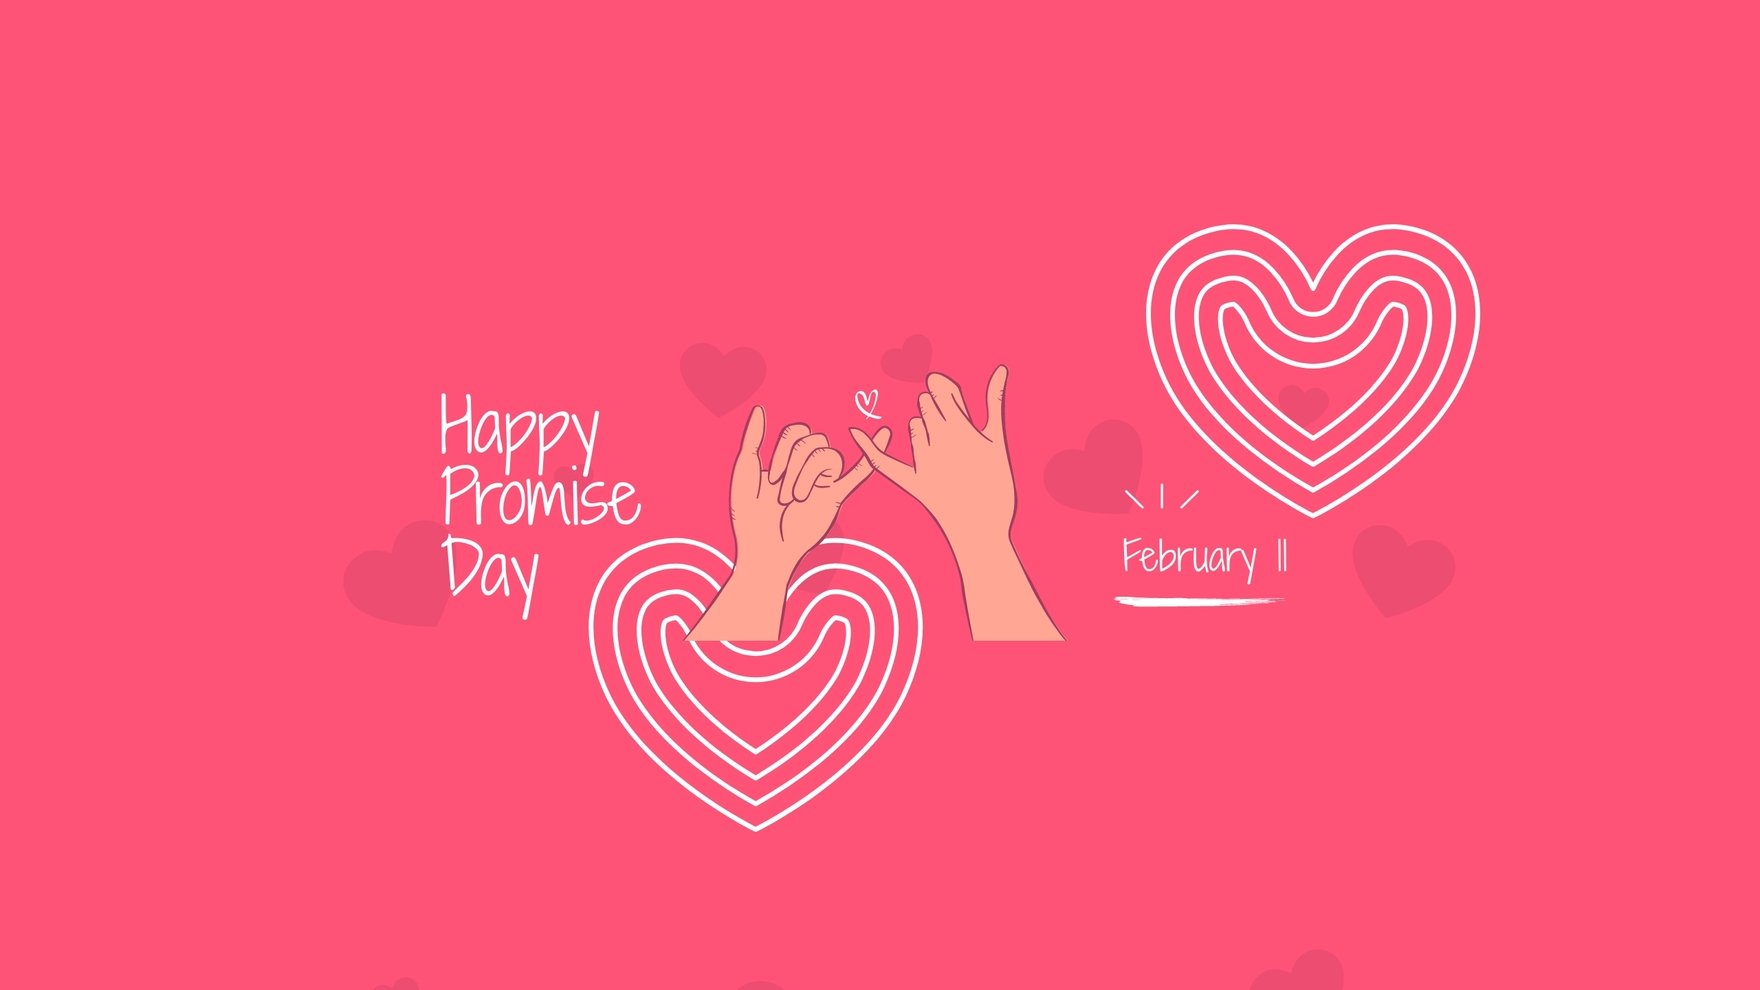 Happy Promise Day Youtube Banner Template